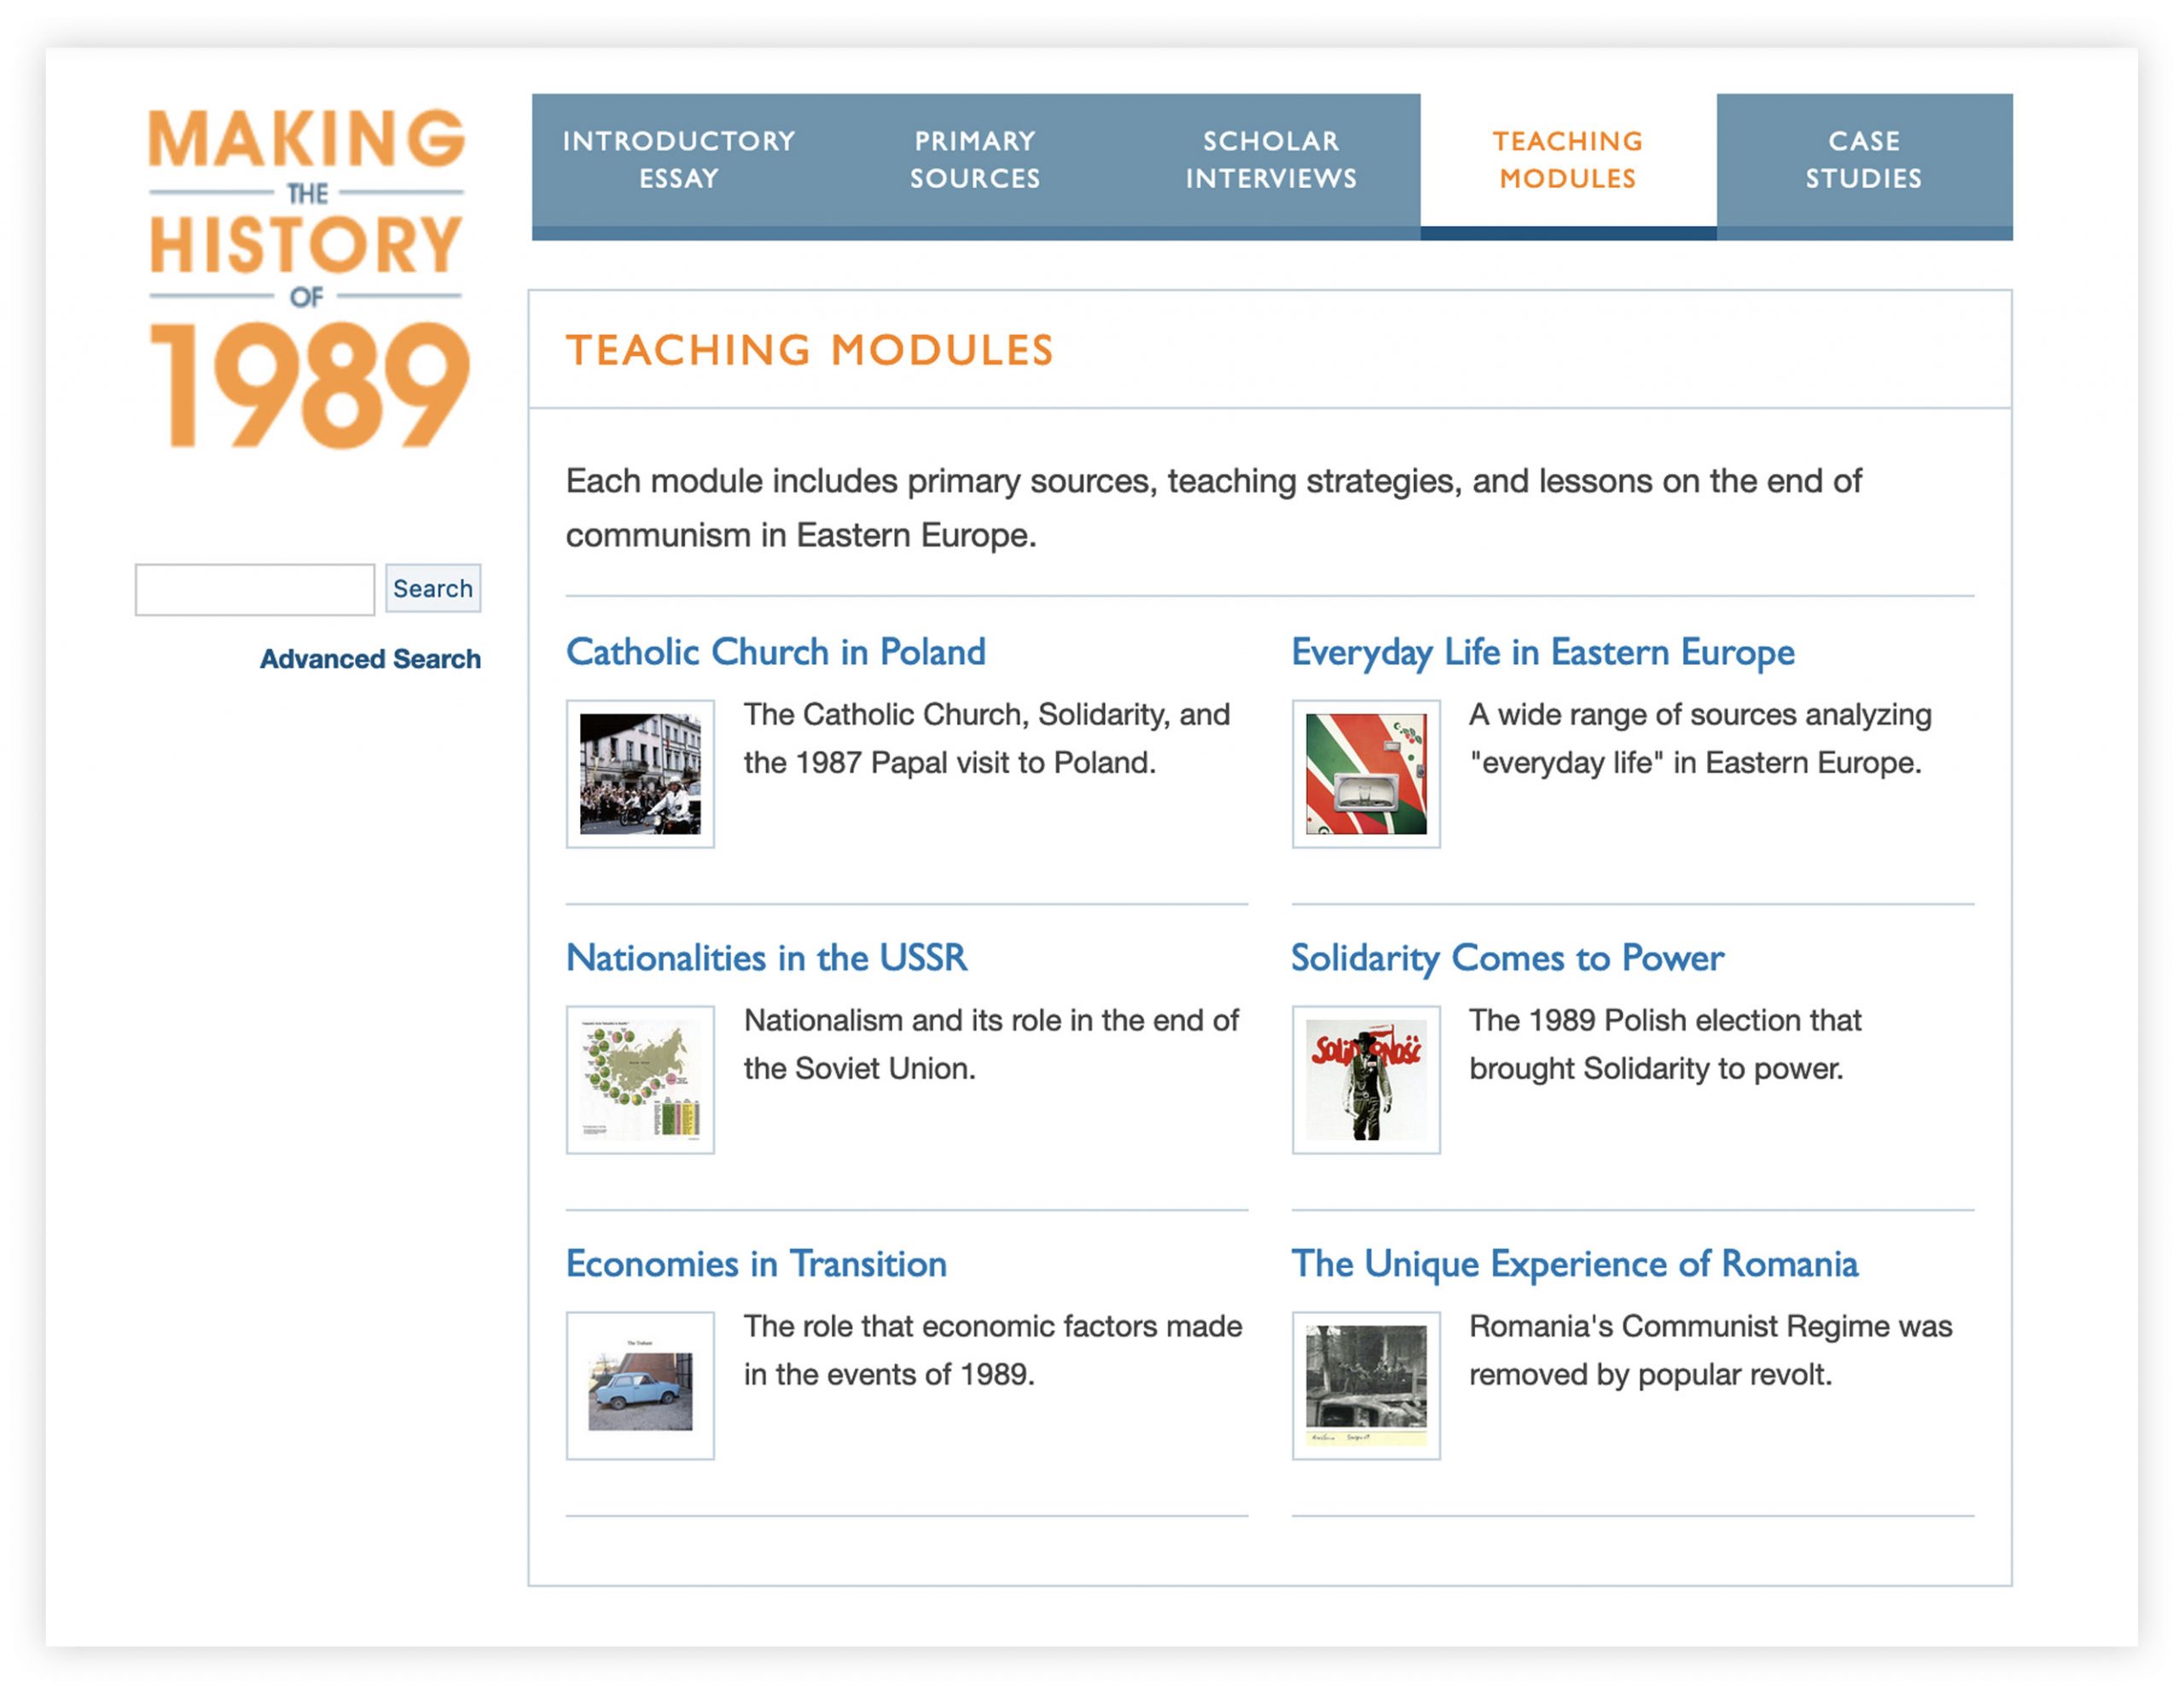 Screengrab of the Making the History of 1989 website Teaching Modules page.